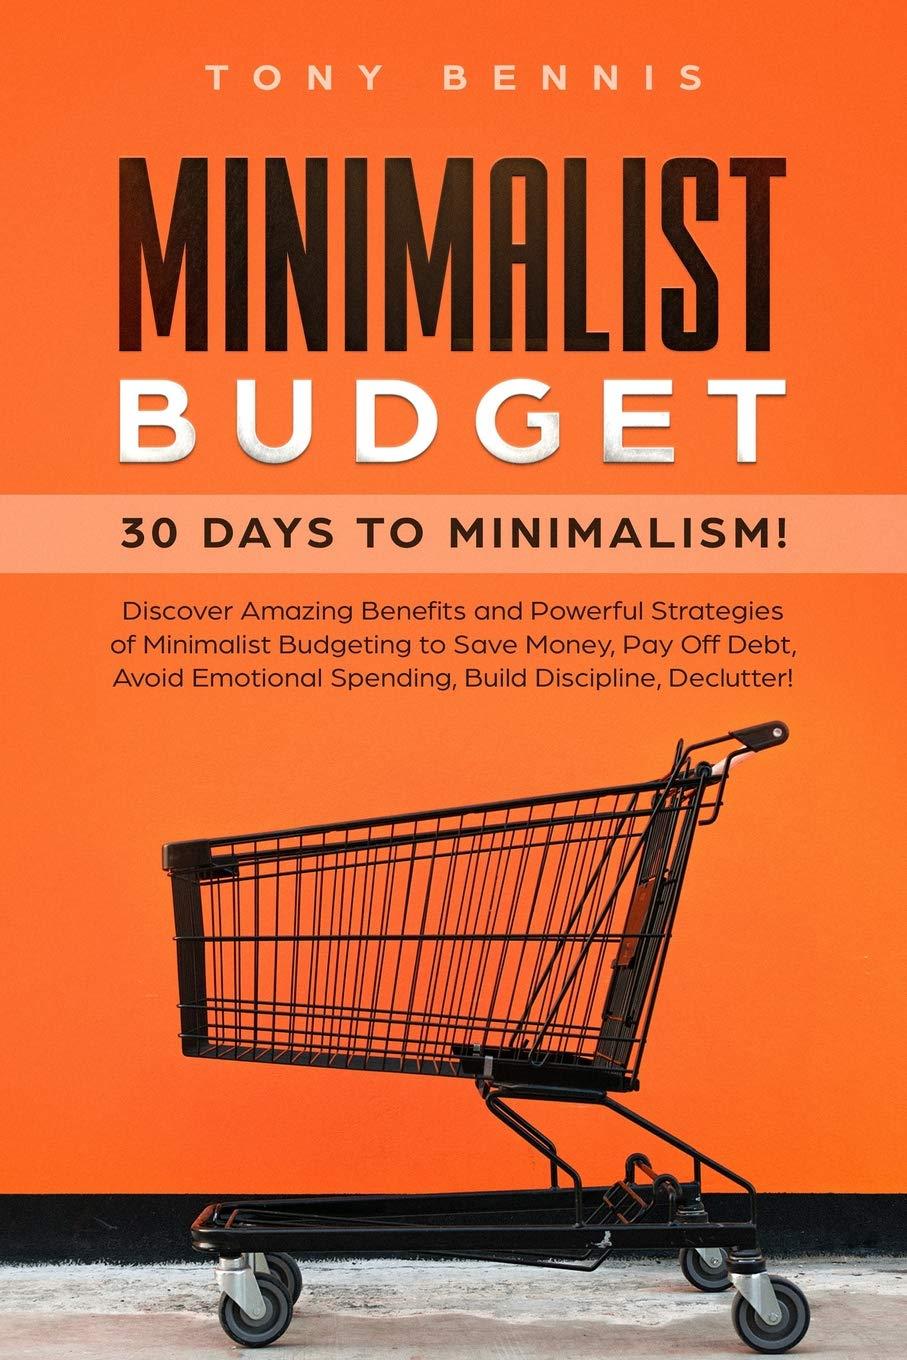 Minimalist Budget 30 Days To Minimalism Discover Amazing Benefits And Powerful Strategies Of Minimalist Budgeting To Save Money Pay Off Debt Avoid Emotional Spending Build Discipline Declutter